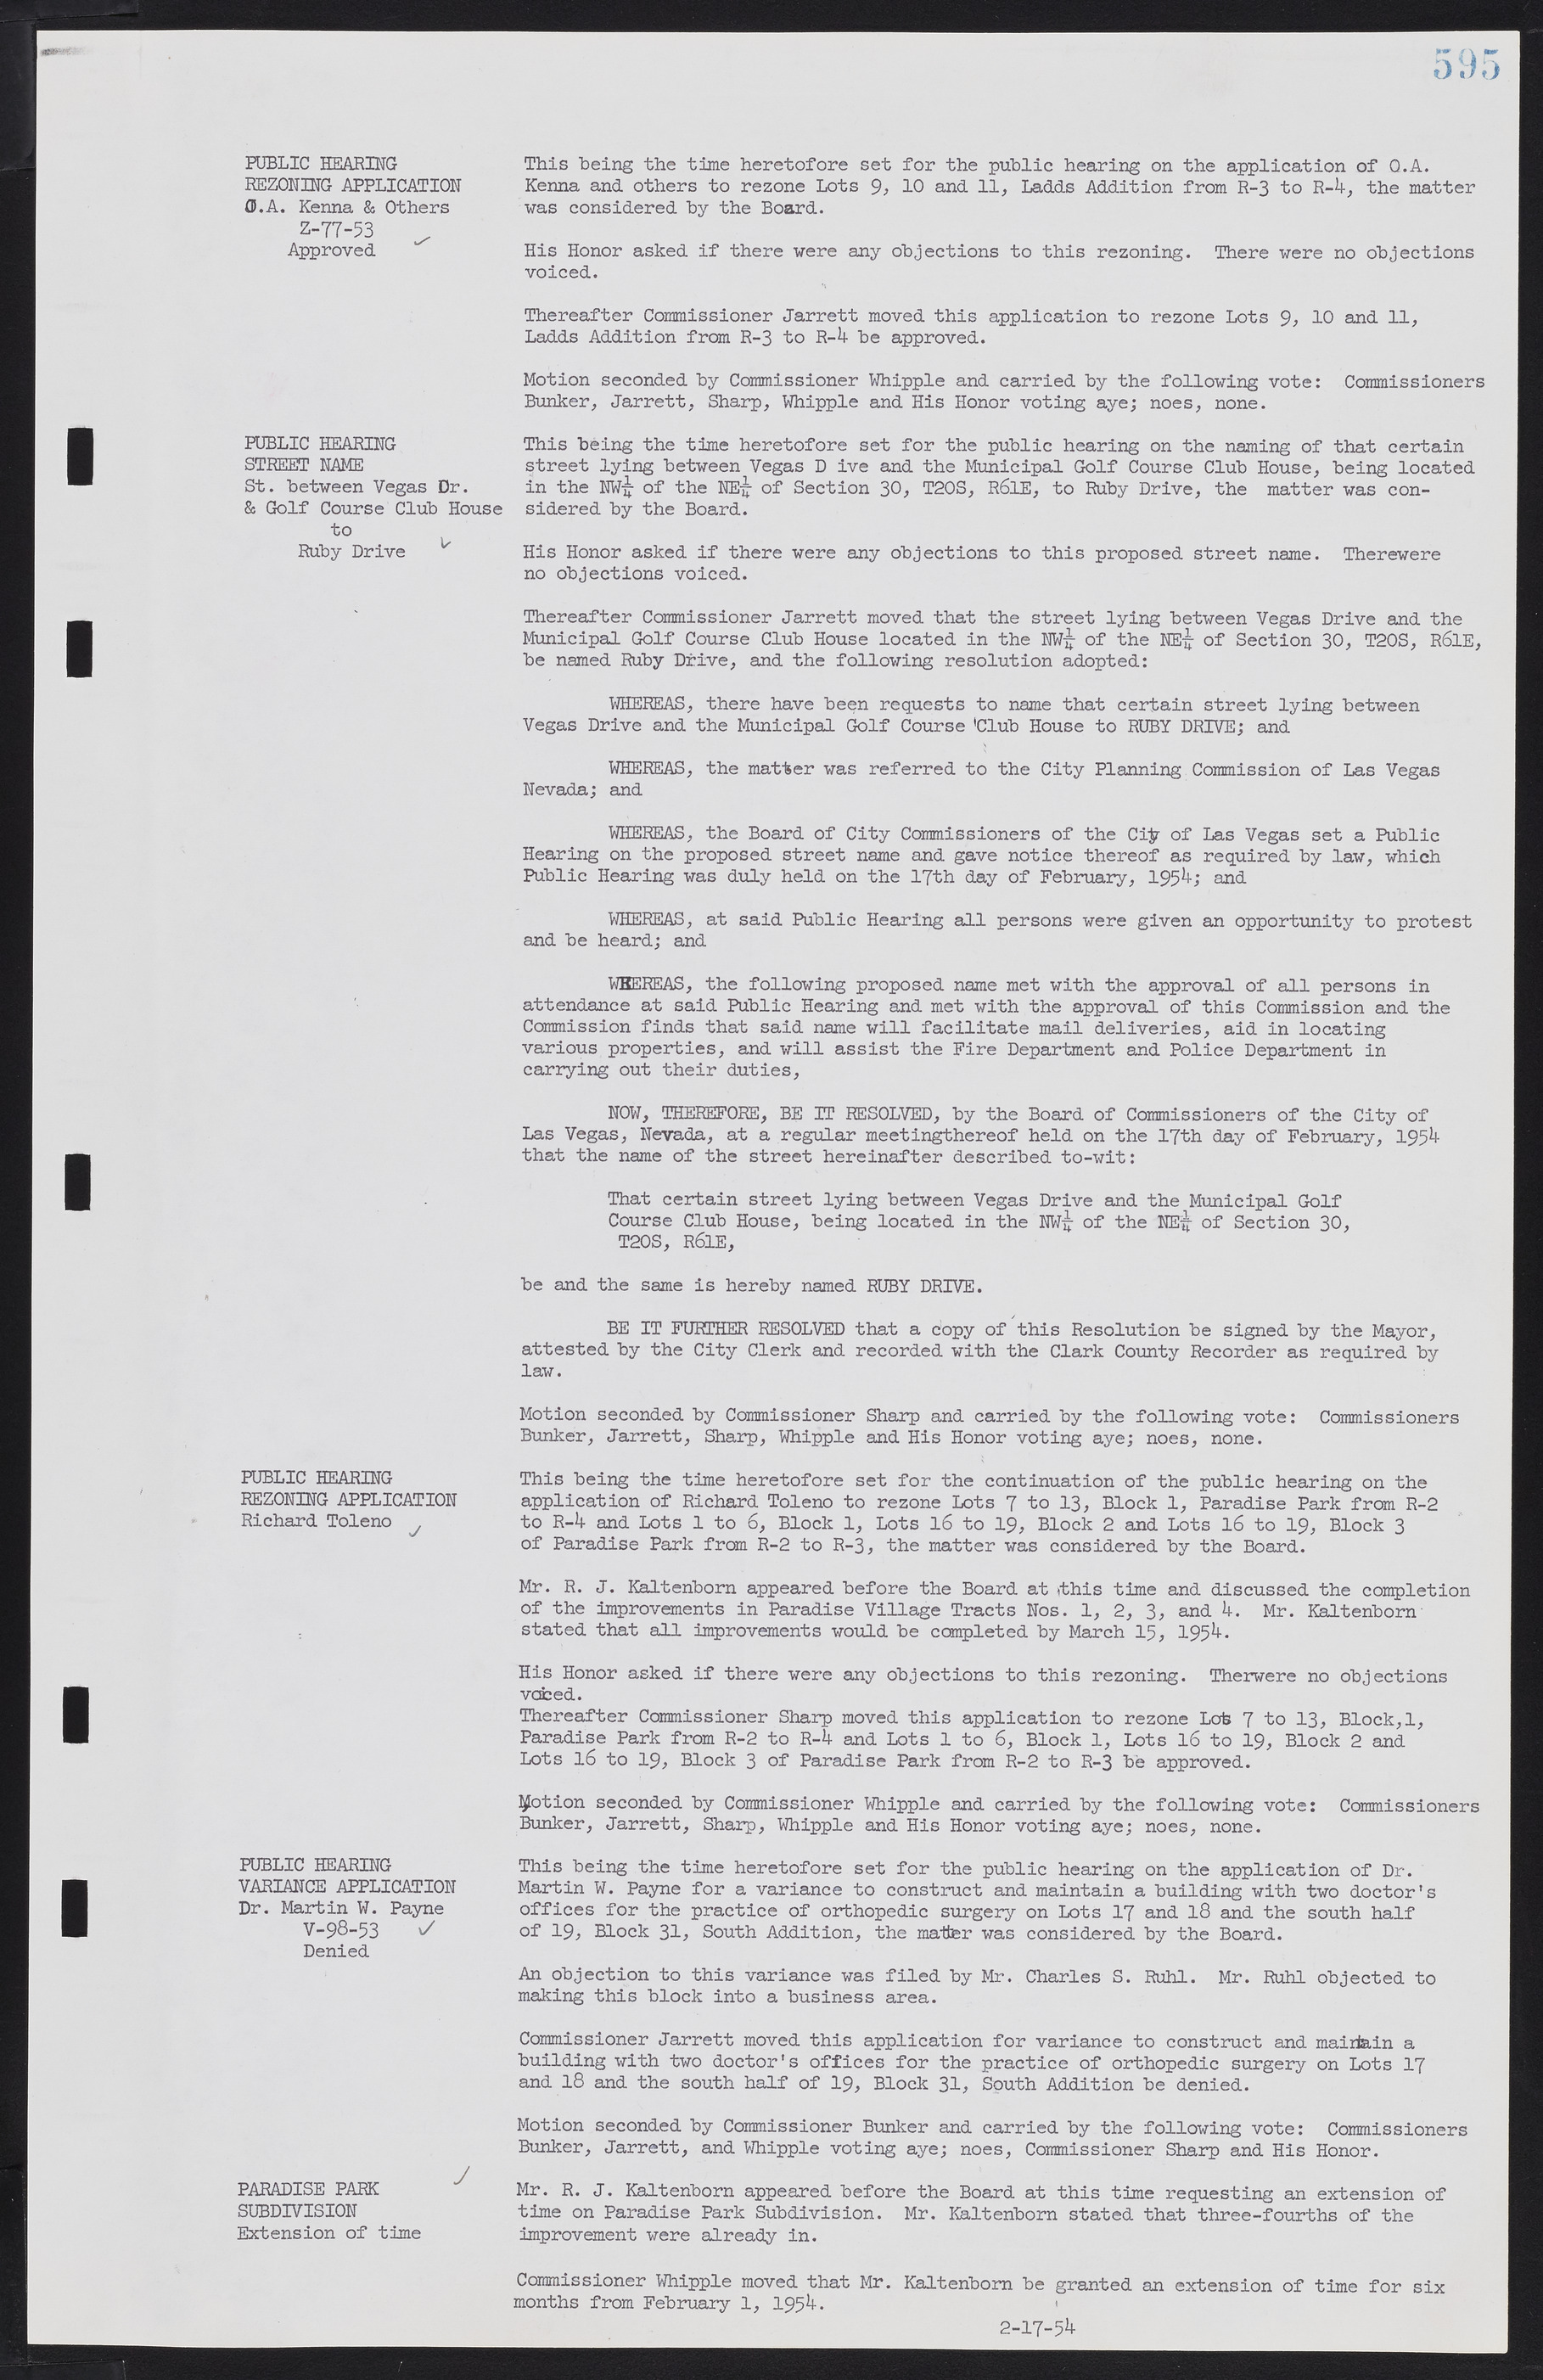 Las Vegas City Commission Minutes, May 26, 1952 to February 17, 1954, lvc000008-625